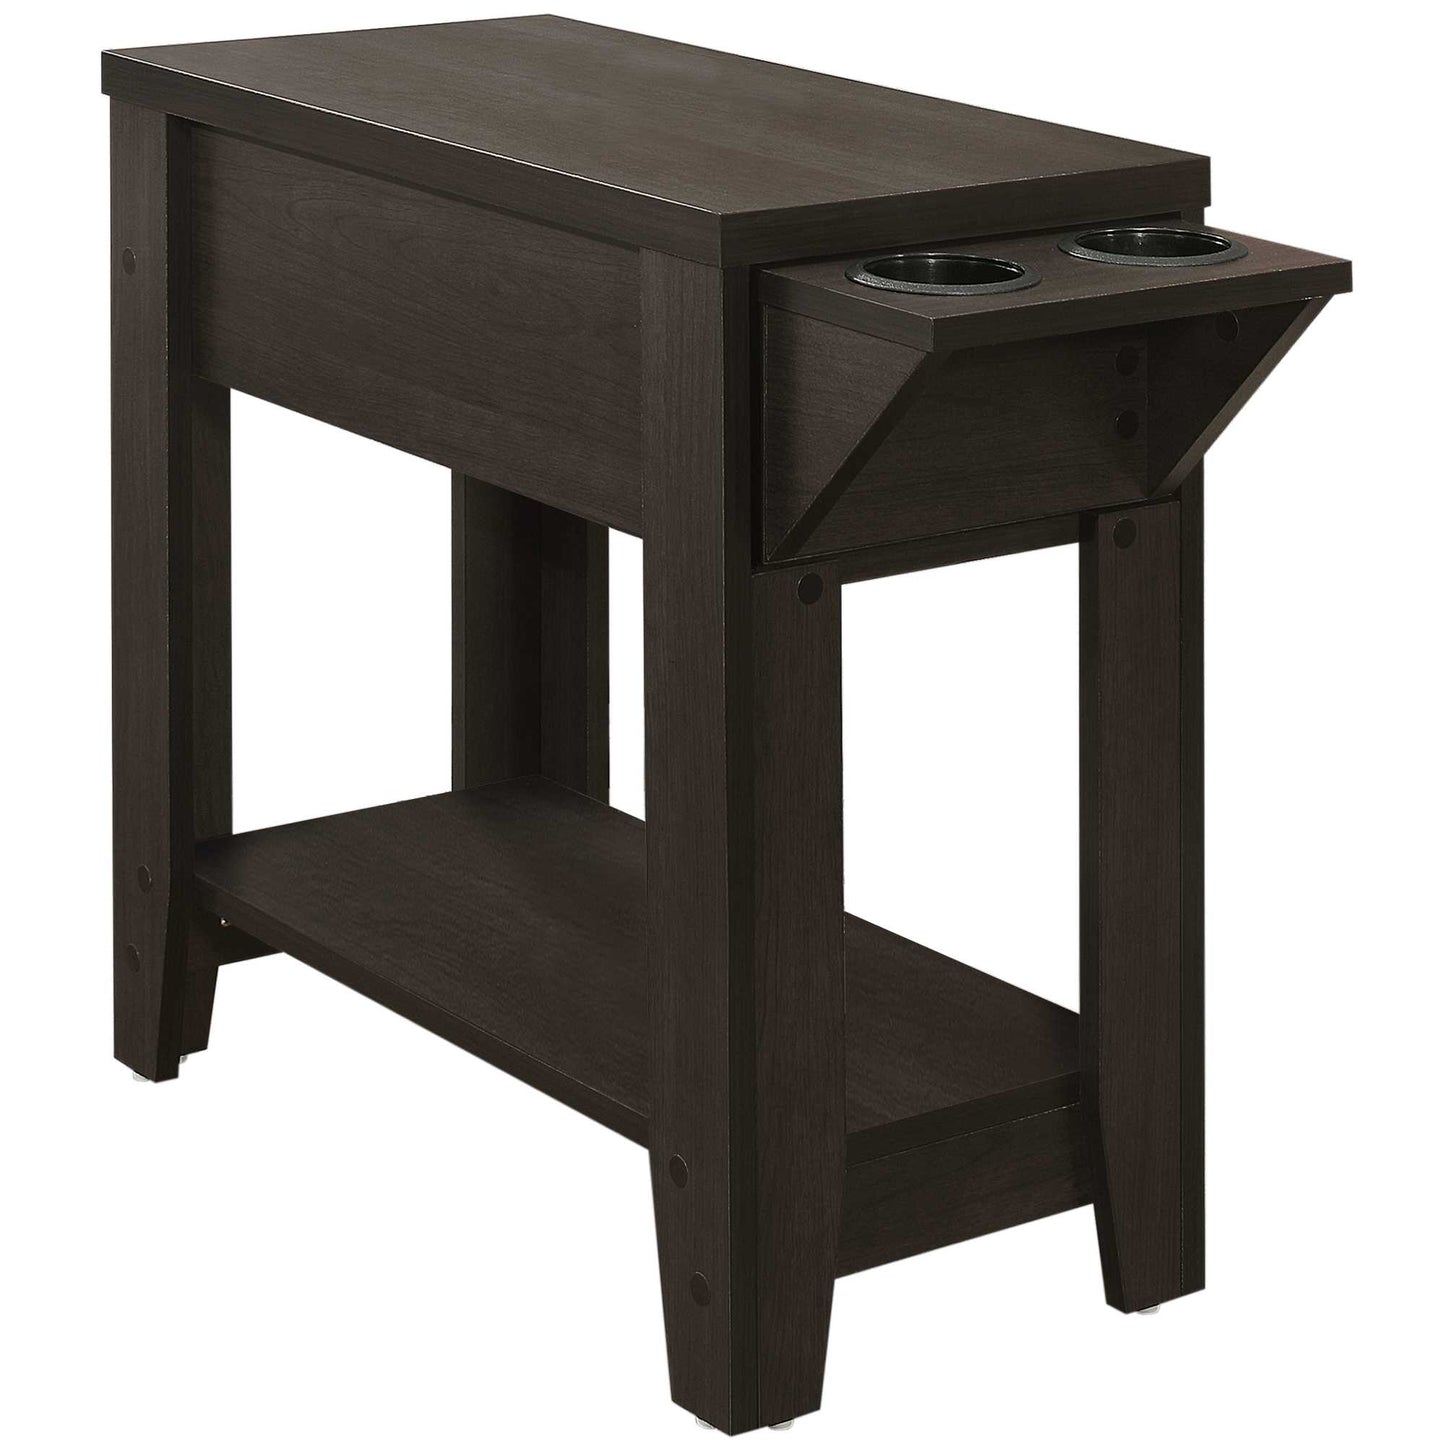 Cappuccino Finish Side Accent Table with Adjustable Cup Holder Drawer and Bottom Shelf